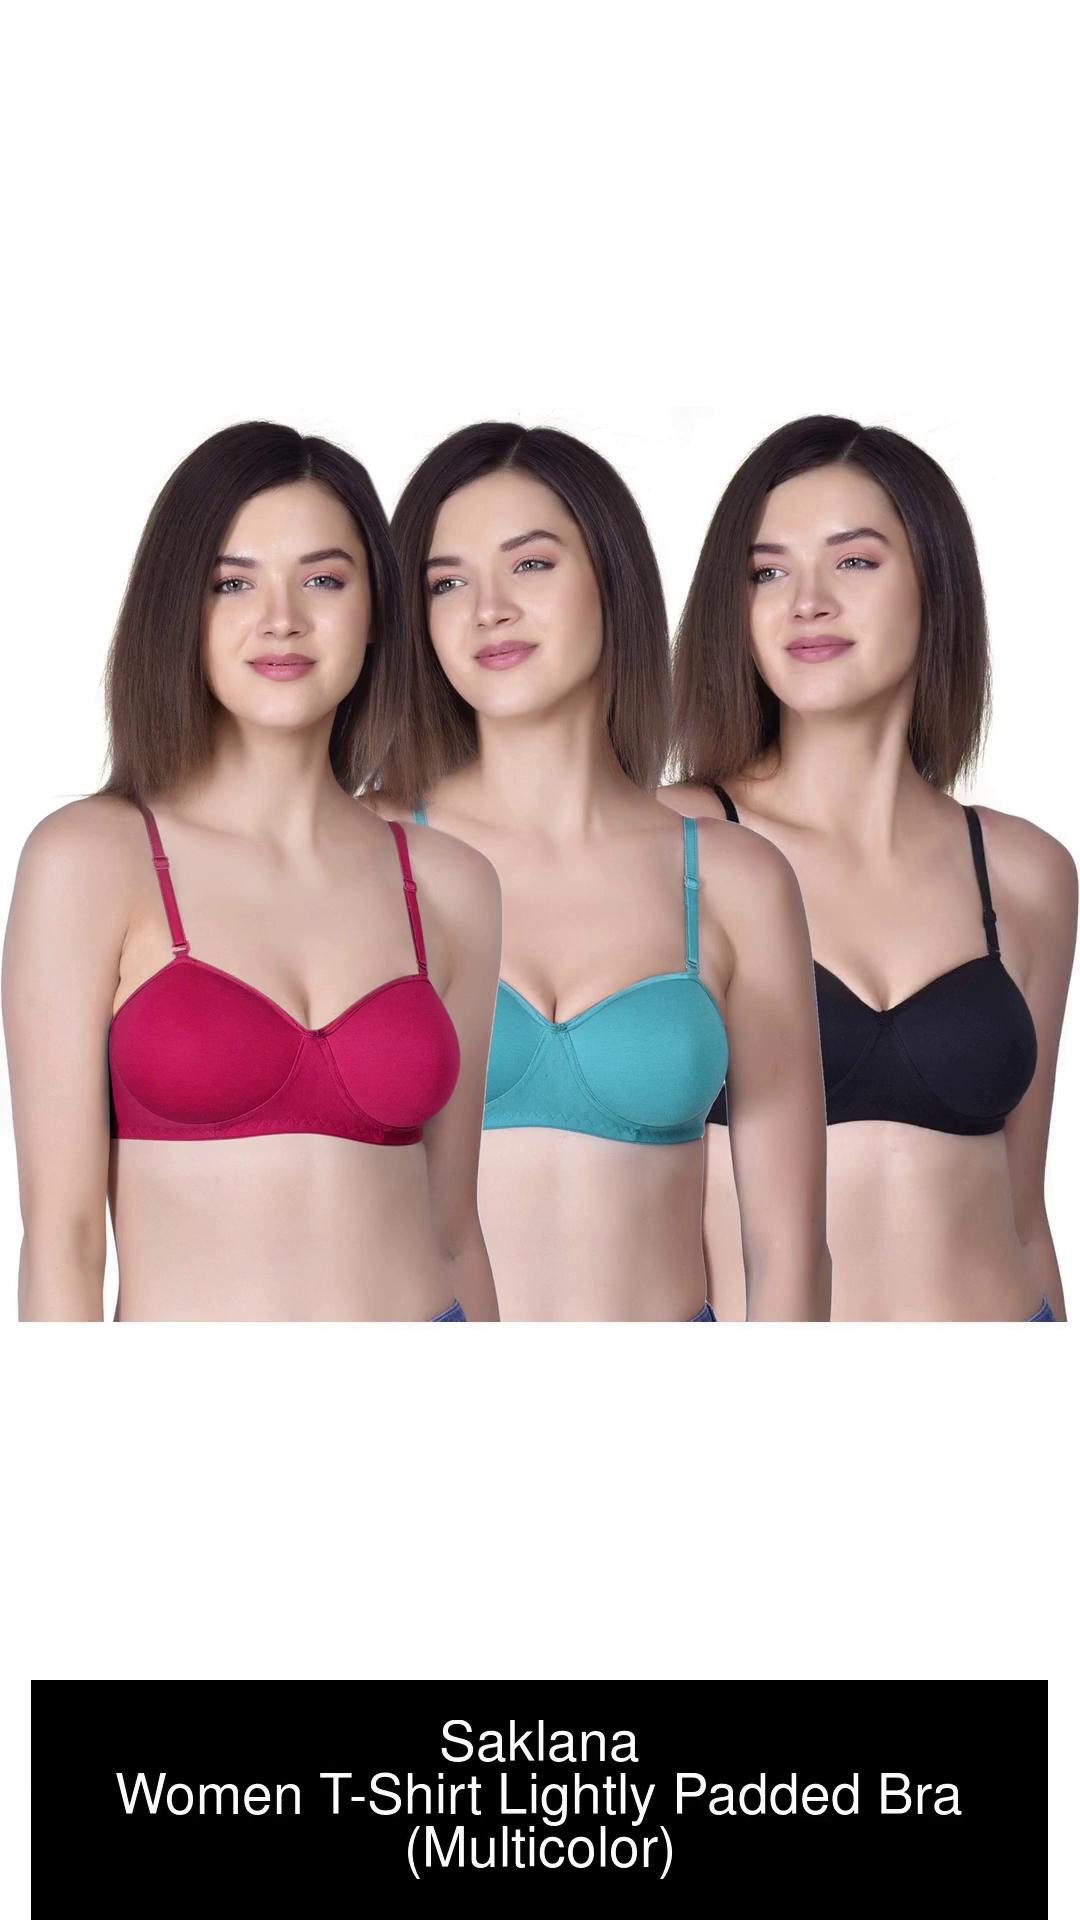 Saklana Women's Cotton Lightly Padded Non-Wired Half Cup T-shirt Bra (Pack  of 3) Combo Women T-Shirt Lightly Padded Bra - Buy Saklana Women's Cotton  Lightly Padded Non-Wired Half Cup T-shirt Bra (Pack